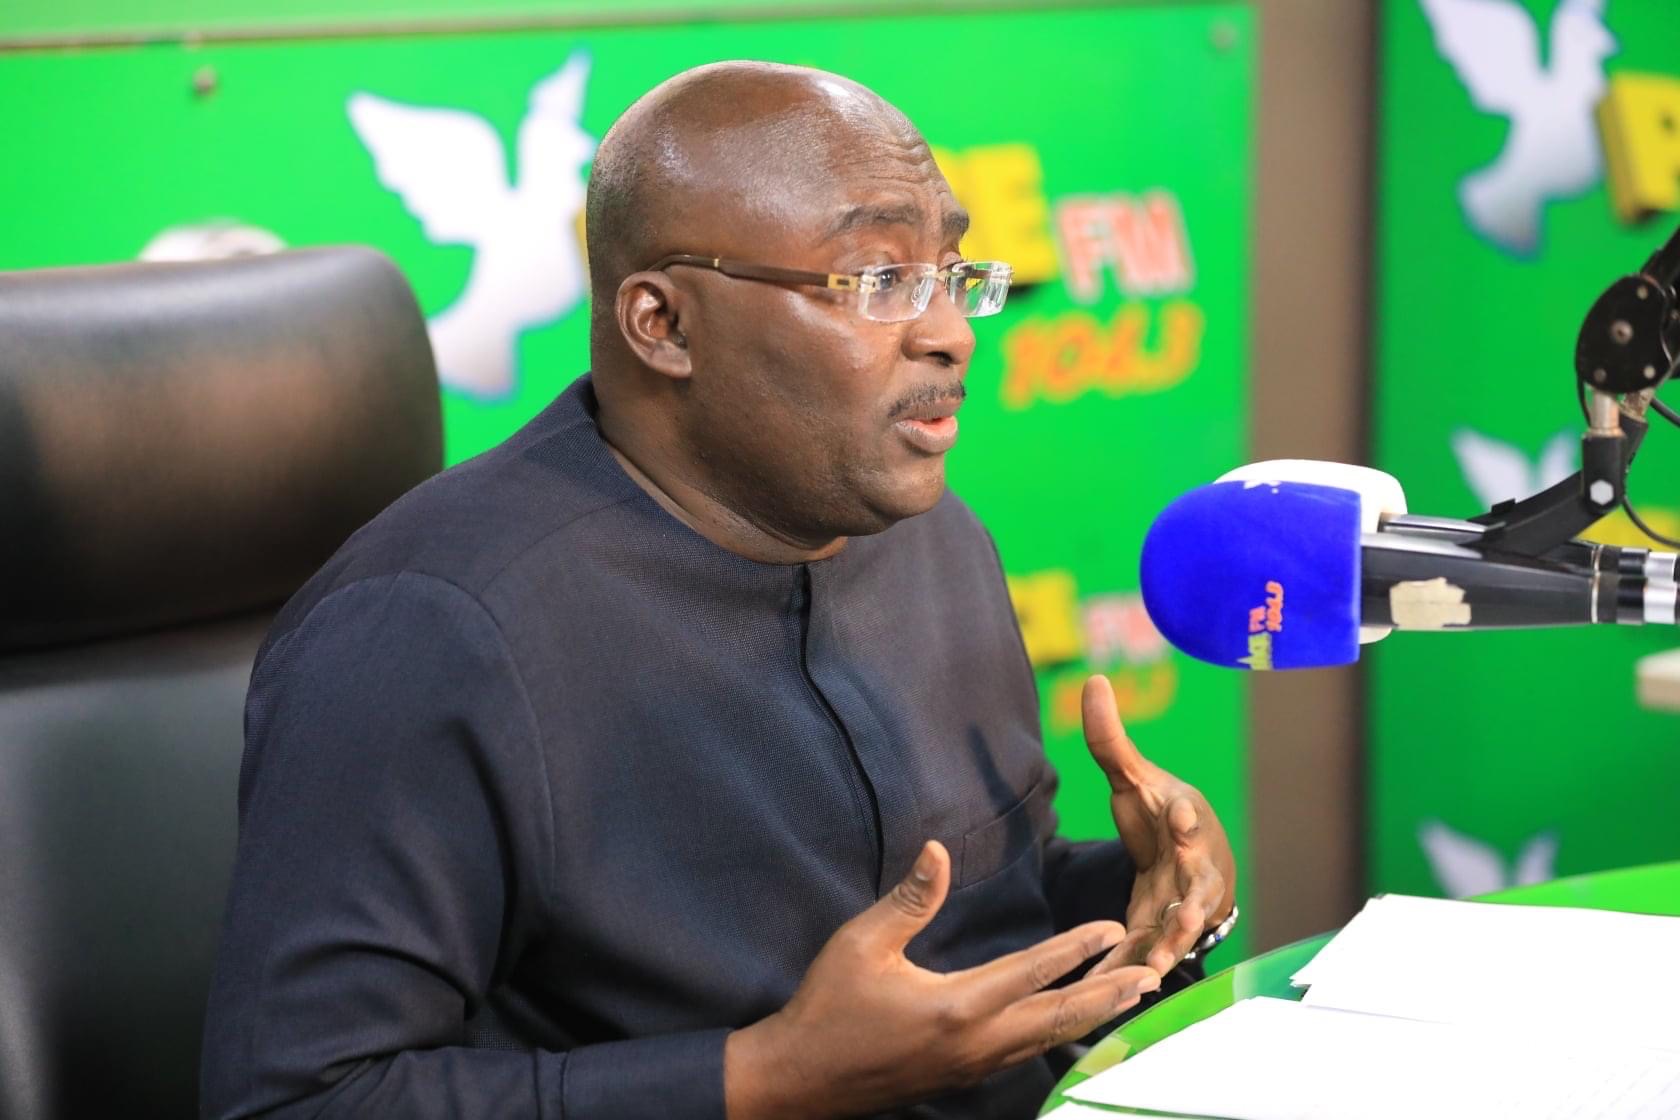 Sammy Gyamfi's data confirms 99.9% of Bawumia's infrastructure data is accurate